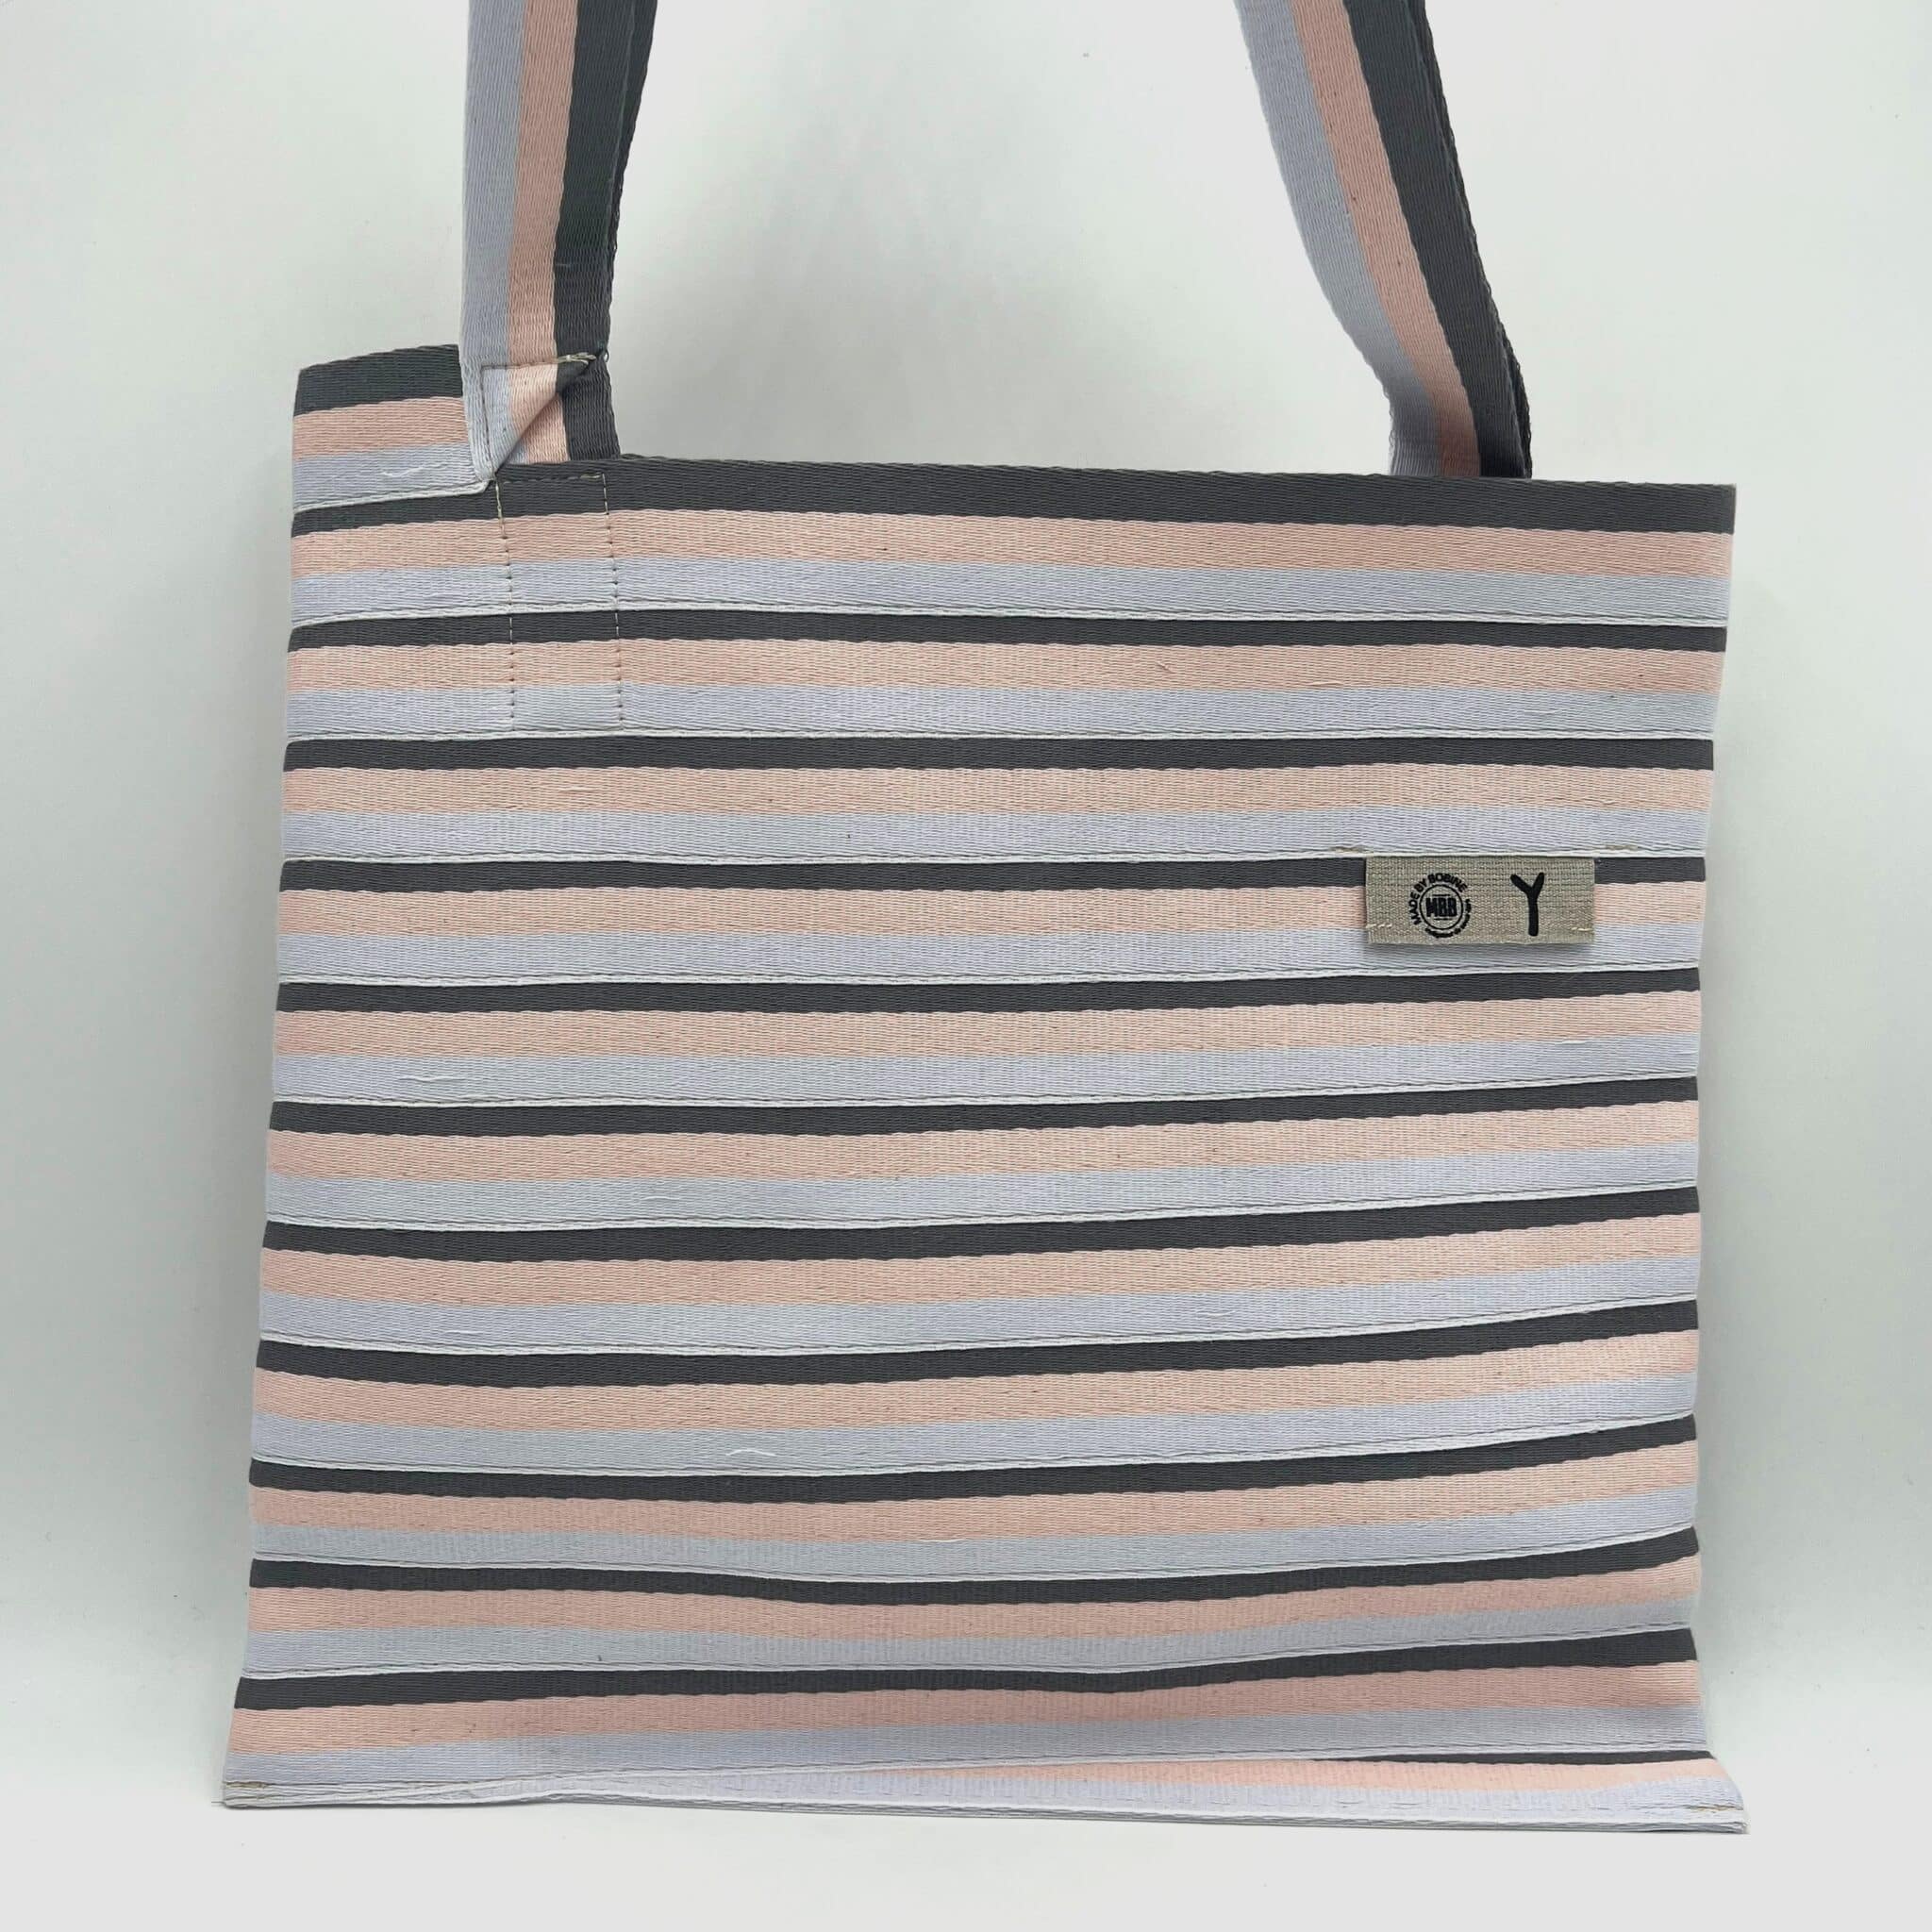 Sac femme tendance couleurs pastel by Made by bobine